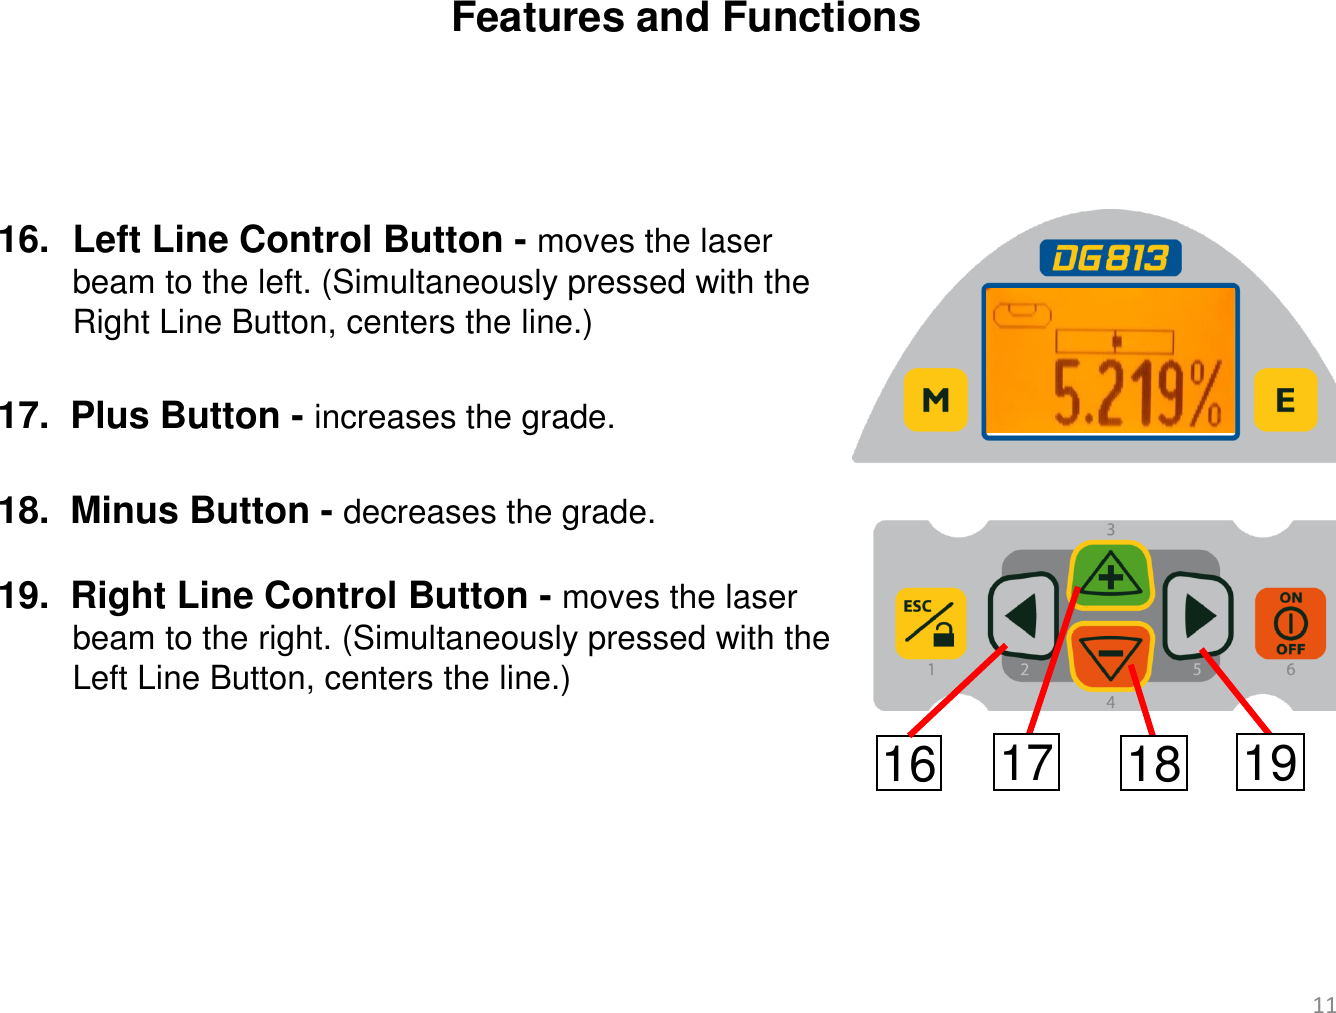 Features and Functions 16. Left Line Control Button - moves the laser          beam to the left. (Simultaneously pressed with the         Right Line Button, centers the line.)  17.  Plus Button - increases the grade.   18.  Minus Button - decreases the grade.  19.  Right Line Control Button - moves the laser         beam to the right. (Simultaneously pressed with the         Left Line Button, centers the line.) 16 17 18 19 11 